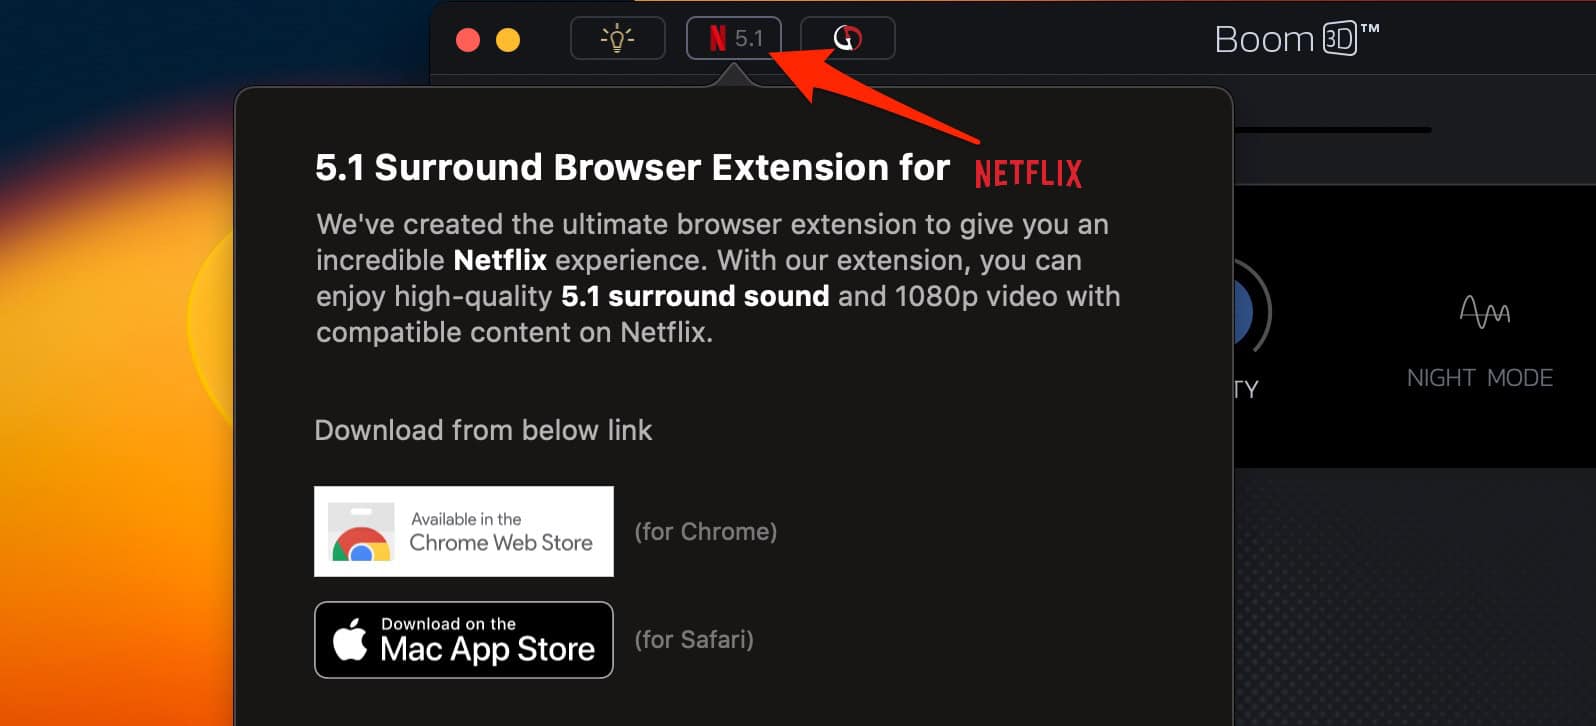 Download the browser extensions for Netflix in the Boom3D app